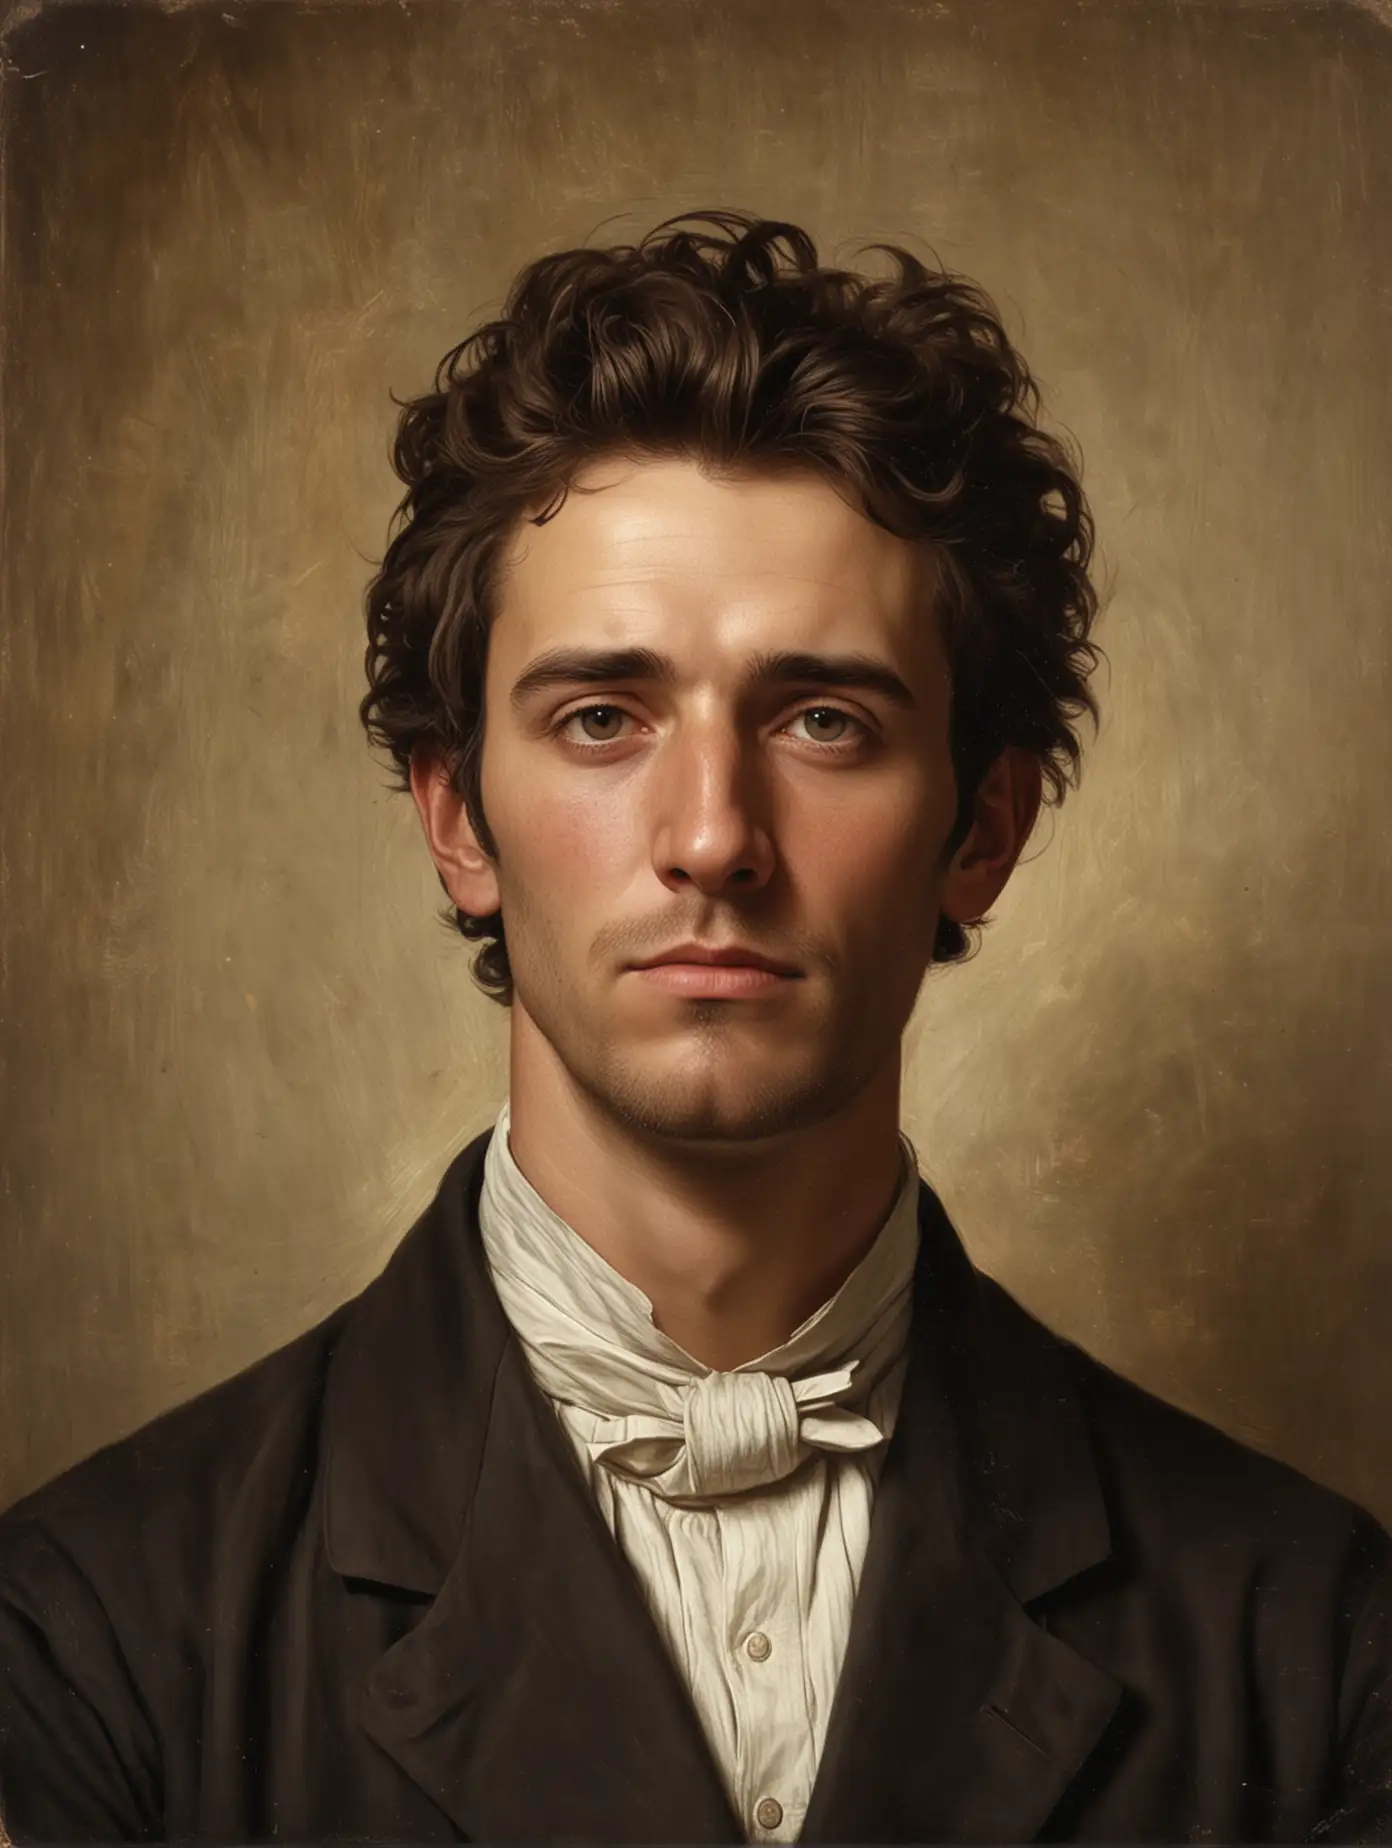 Man in 19th Century Painting Authentic Portrait with Distinct Features